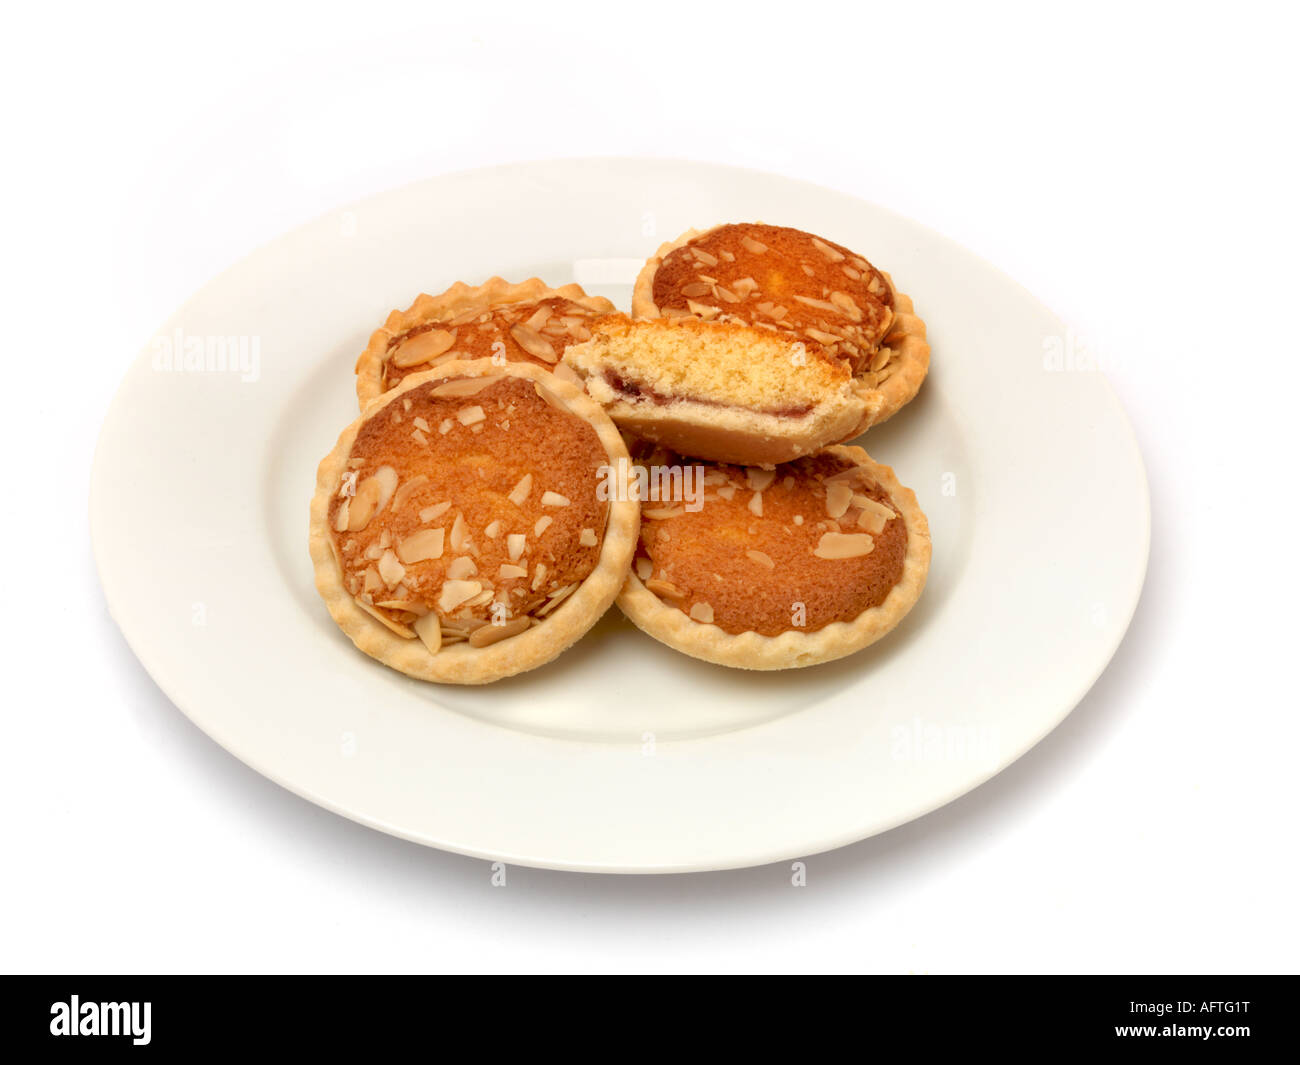 A Plate Of Bakewell Tarts one Cut in Halk to Show Filling Stock Photo